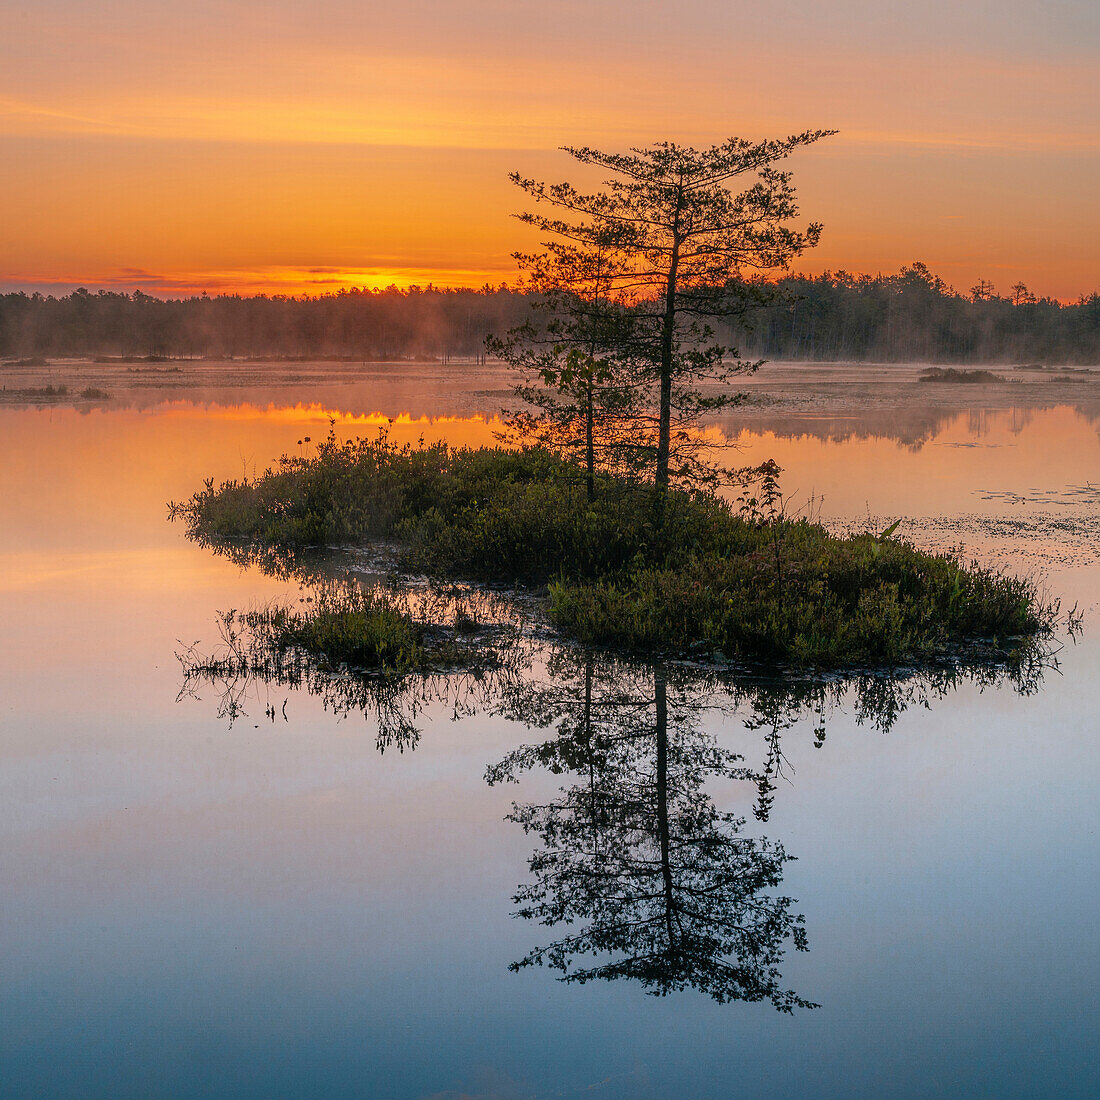 USA, New Jersey, Pinelands National Reserve. Sunrise reflections in marsh.